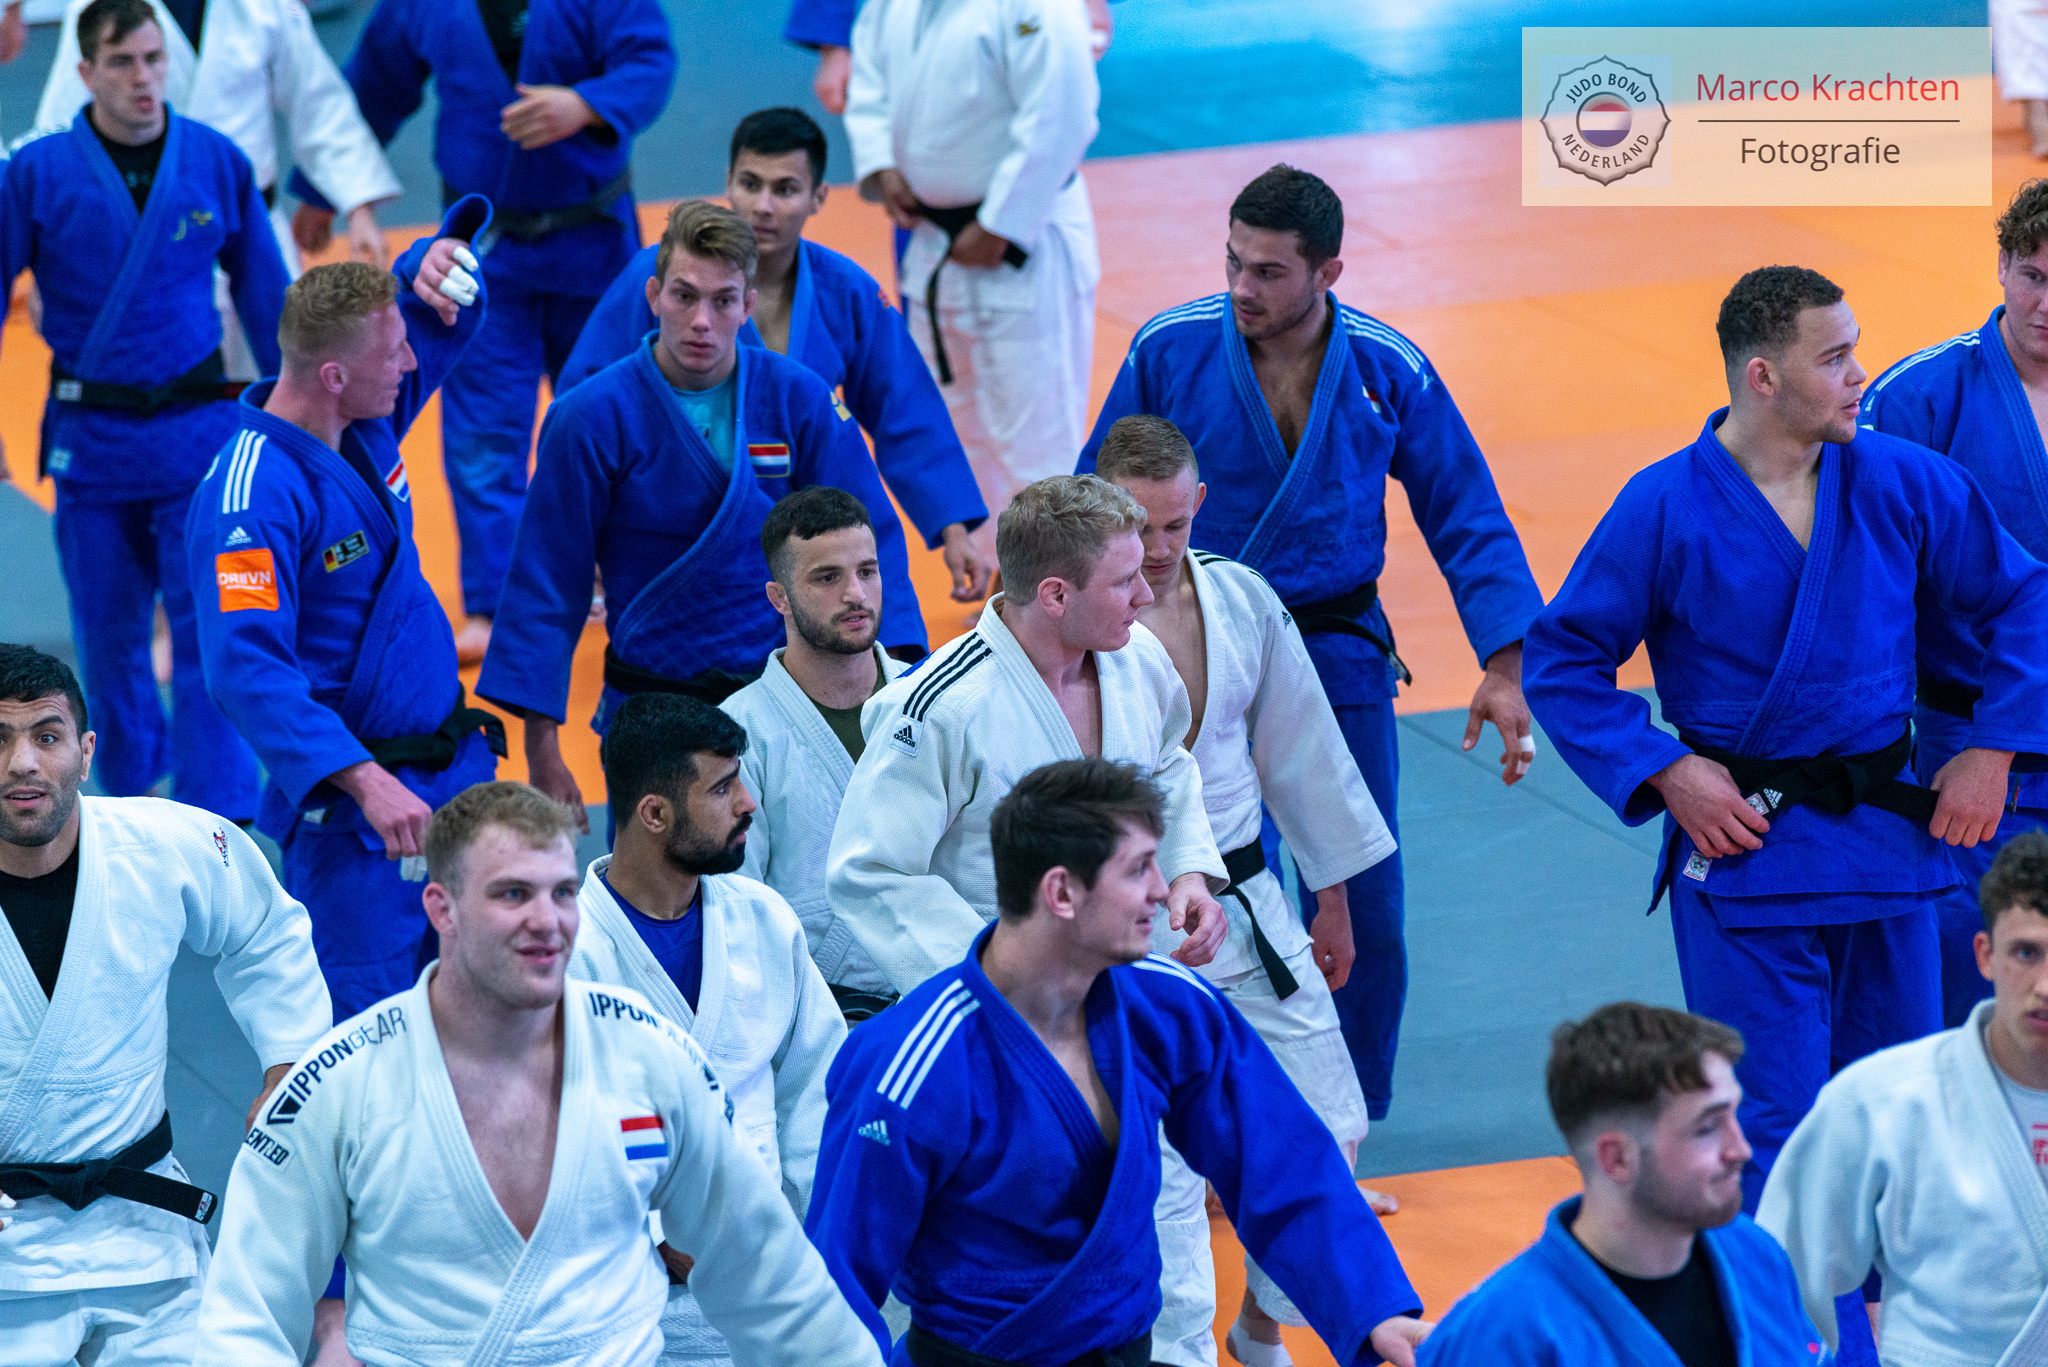 PAPENDAL HOSTS WORLD AND EUROPEAN CHAMPIONS IN TRAINING CAMP